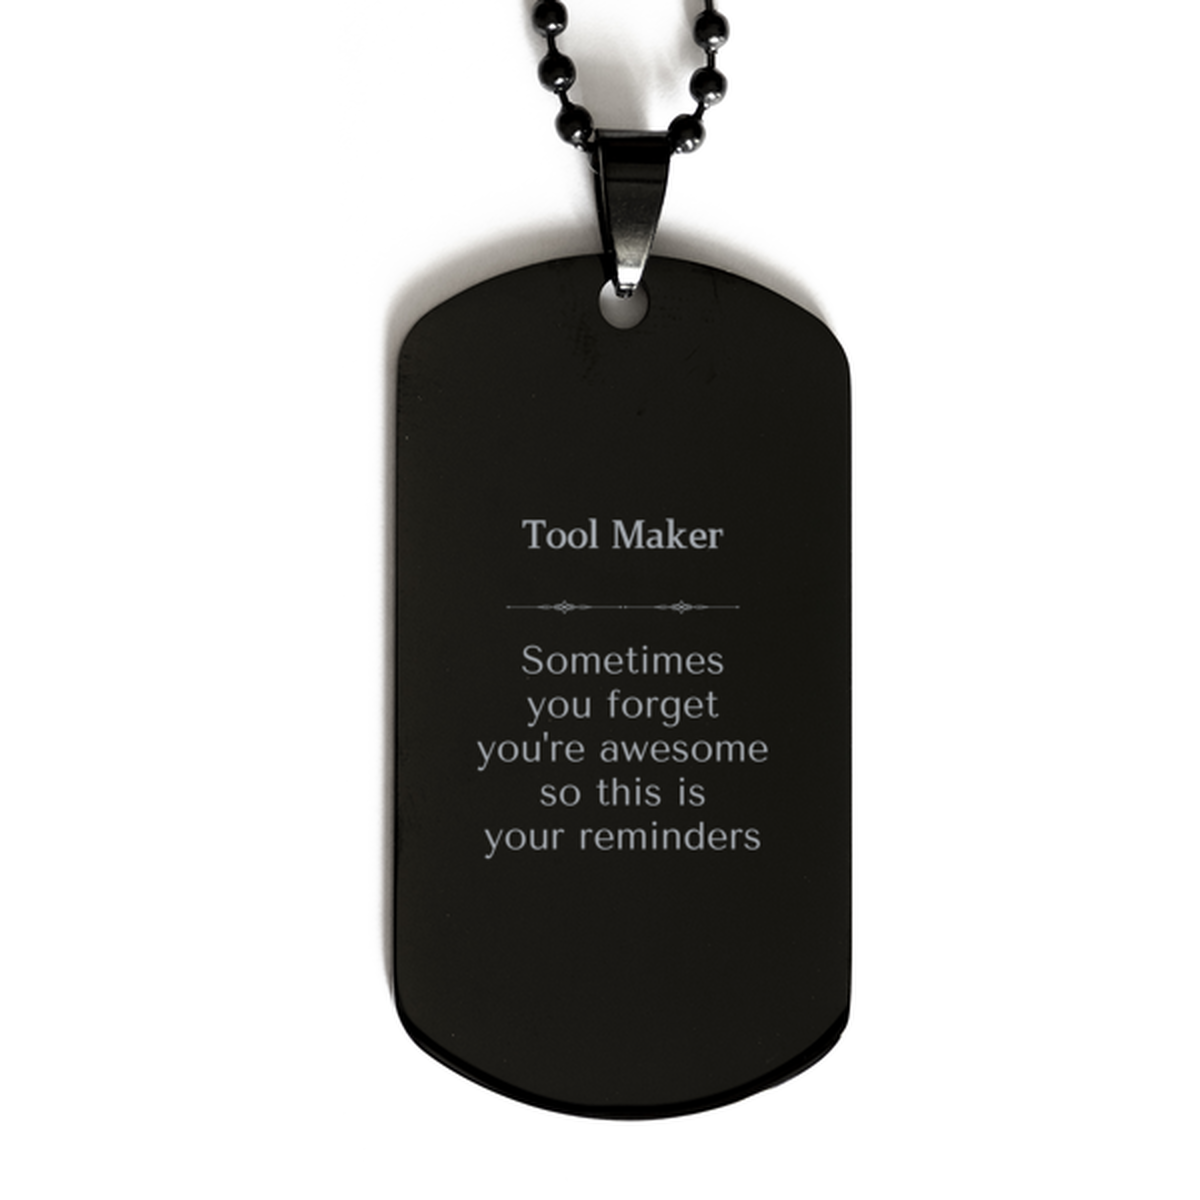 Sentimental Tool Maker Black Dog Tag, Tool Maker Sometimes you forget you're awesome so this is your reminders, Graduation Christmas Birthday Gifts for Tool Maker, Men, Women, Coworkers